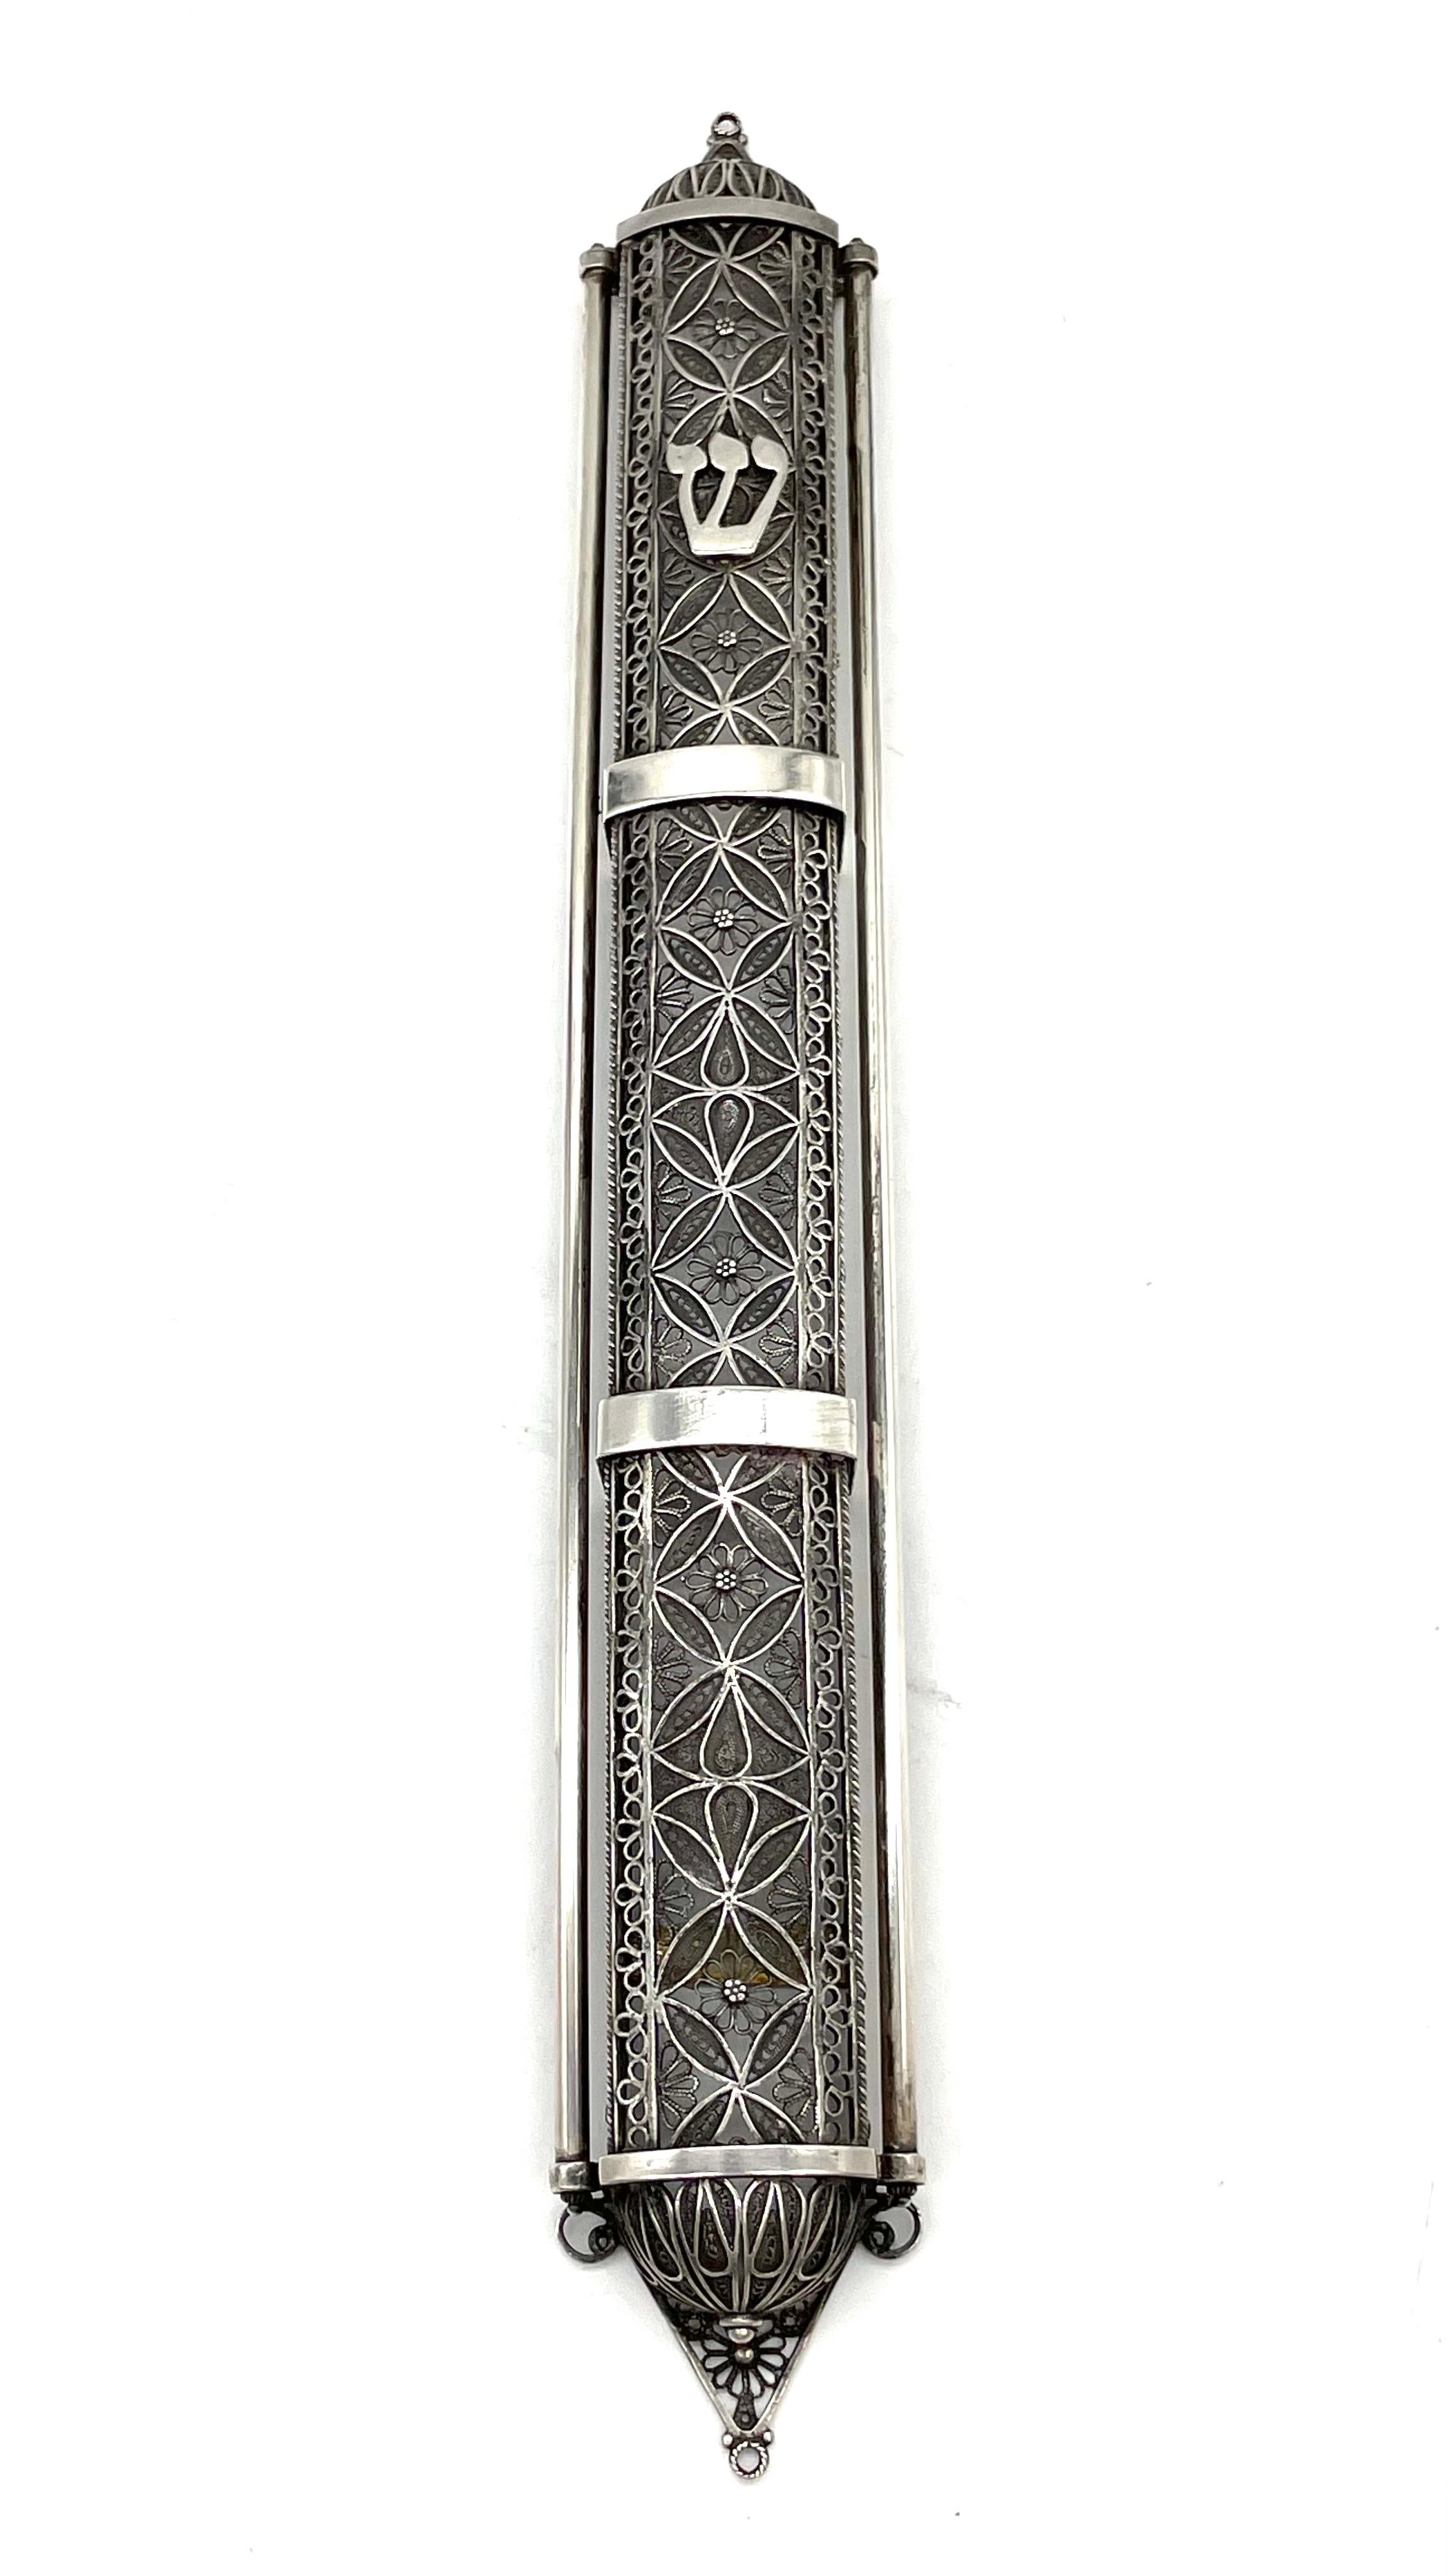 A beautiful, large silver mezuzah case, made in Jerusalem by the artist Chaim Gershi. Signed by the artist and dated, the case is handcrafted in a unique filigree design, showcasing geometrical figures and floral elements throughout, while the